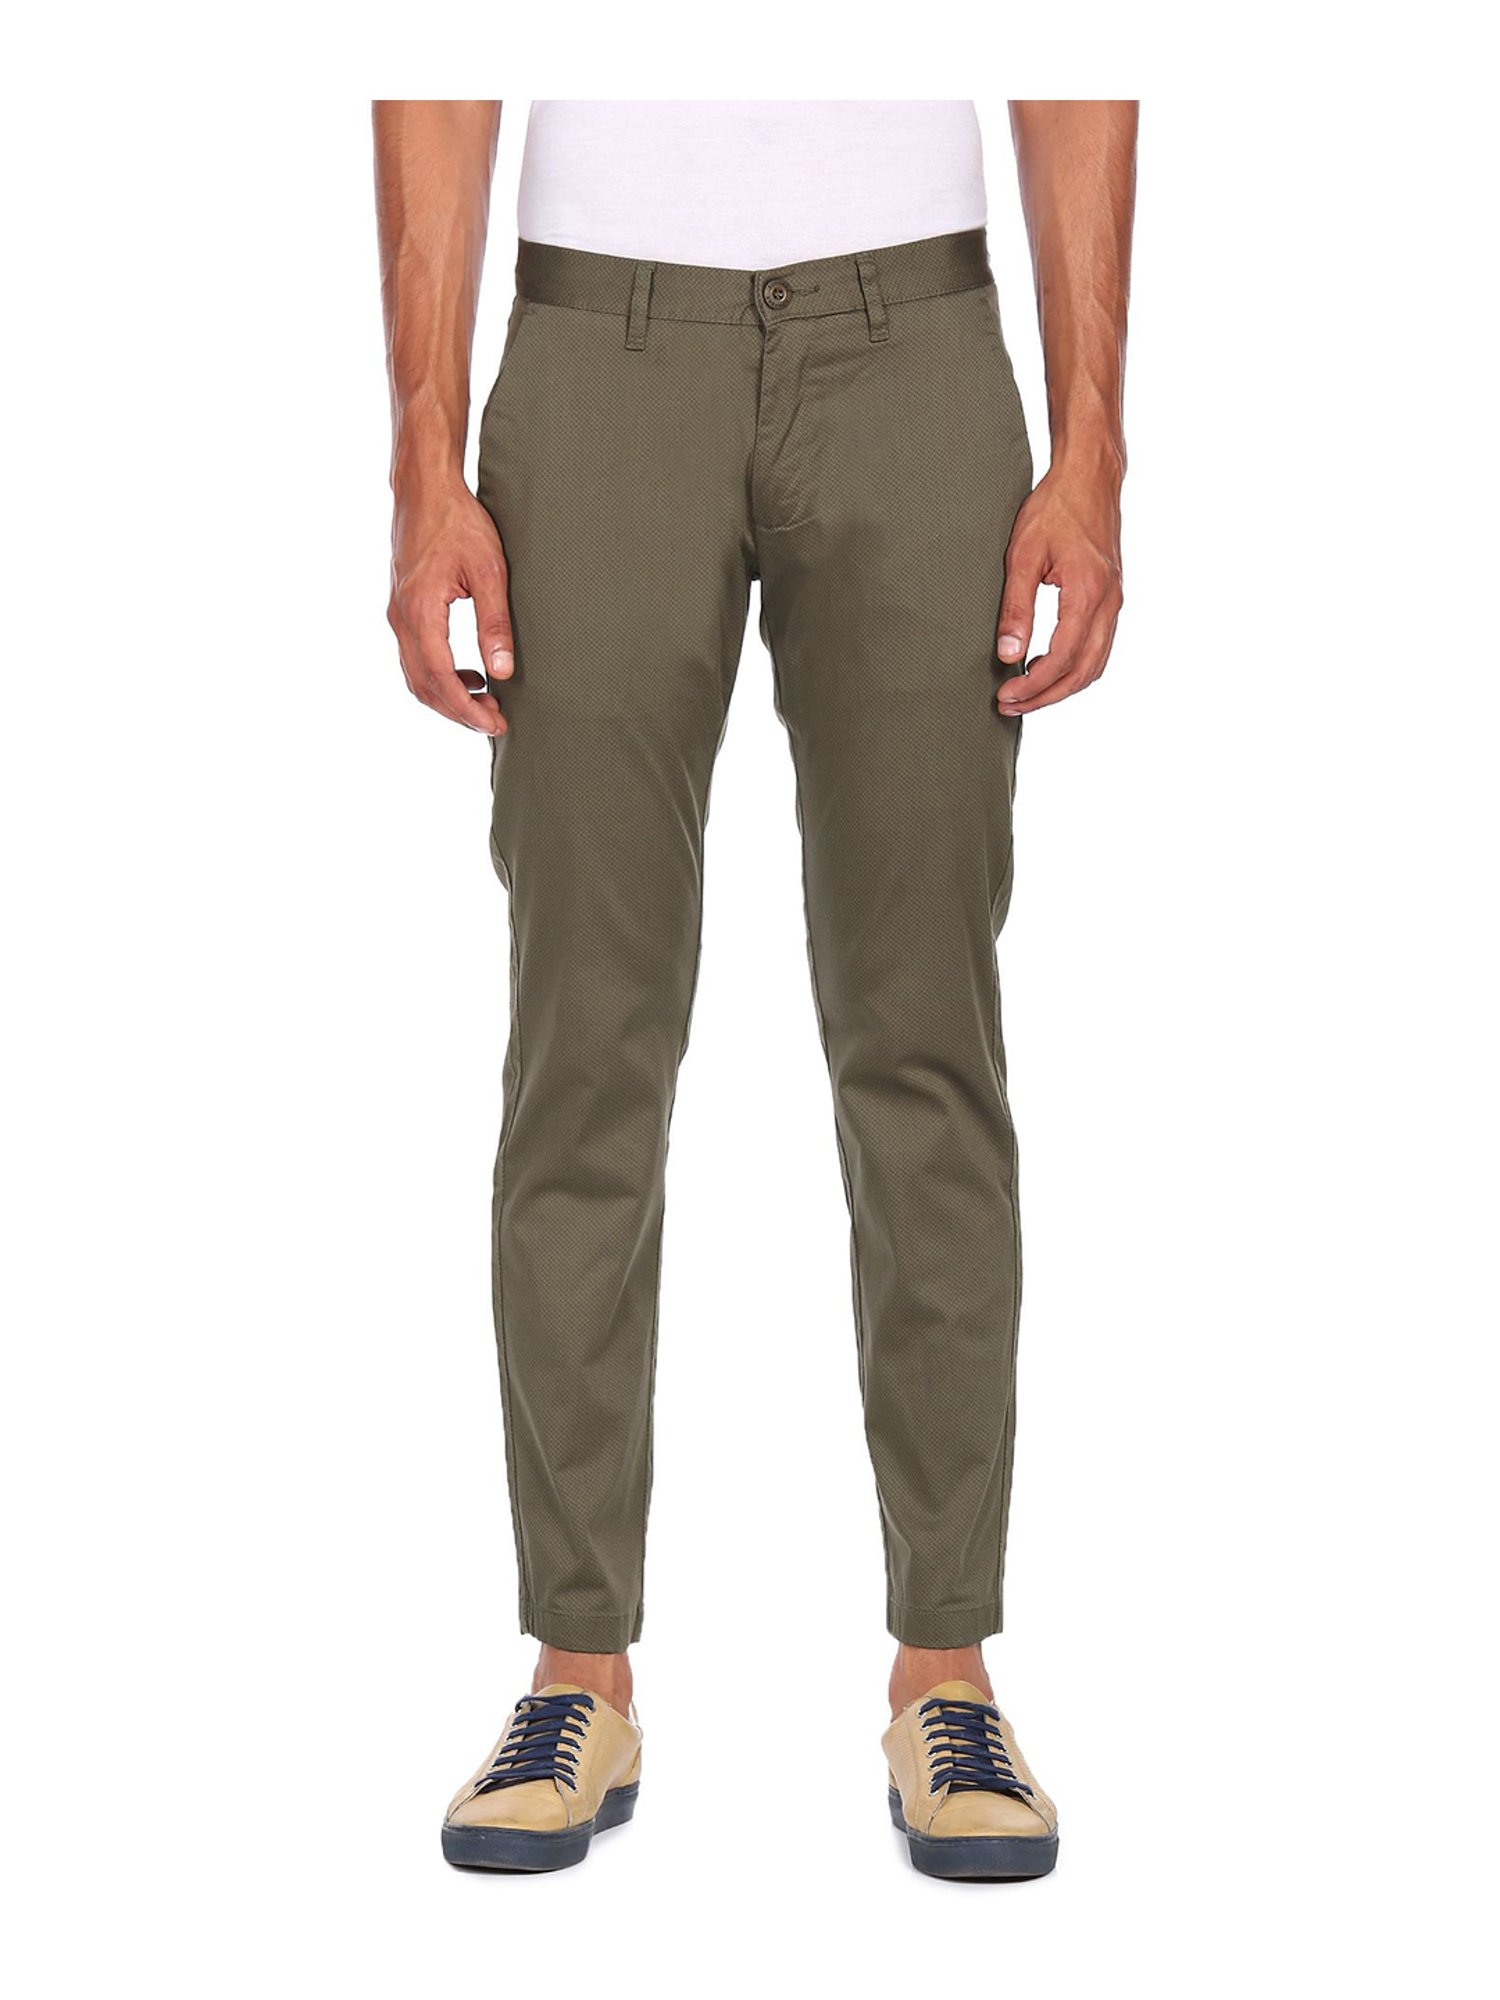 Buy Olive Trousers  Pants for Men by Ruggers Online  Ajiocom